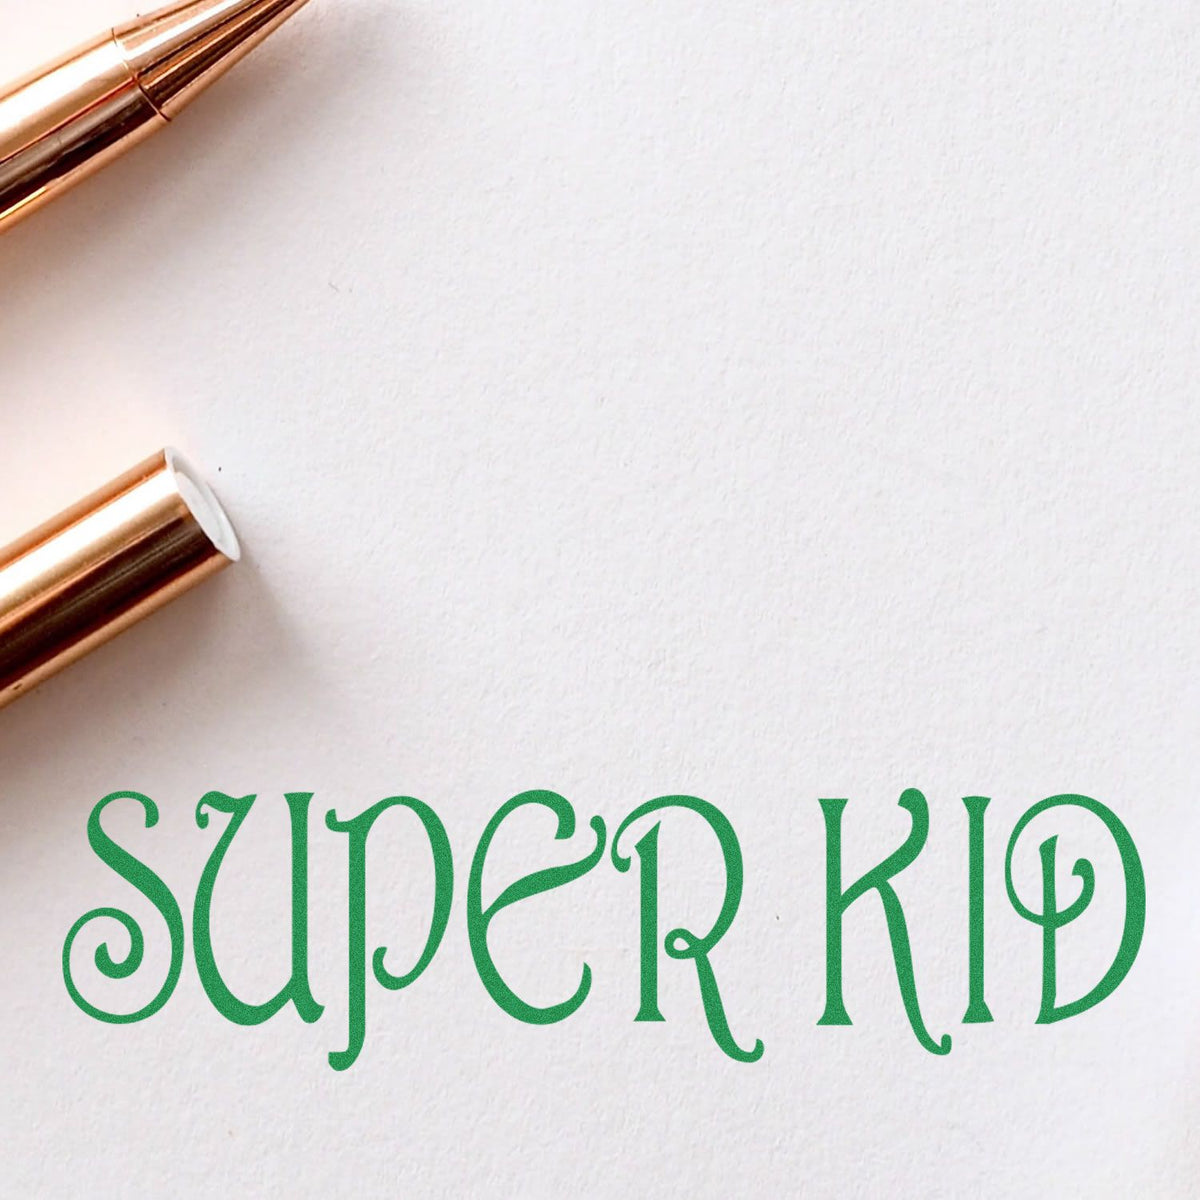 Self Inking Super Kid Stamp In Use